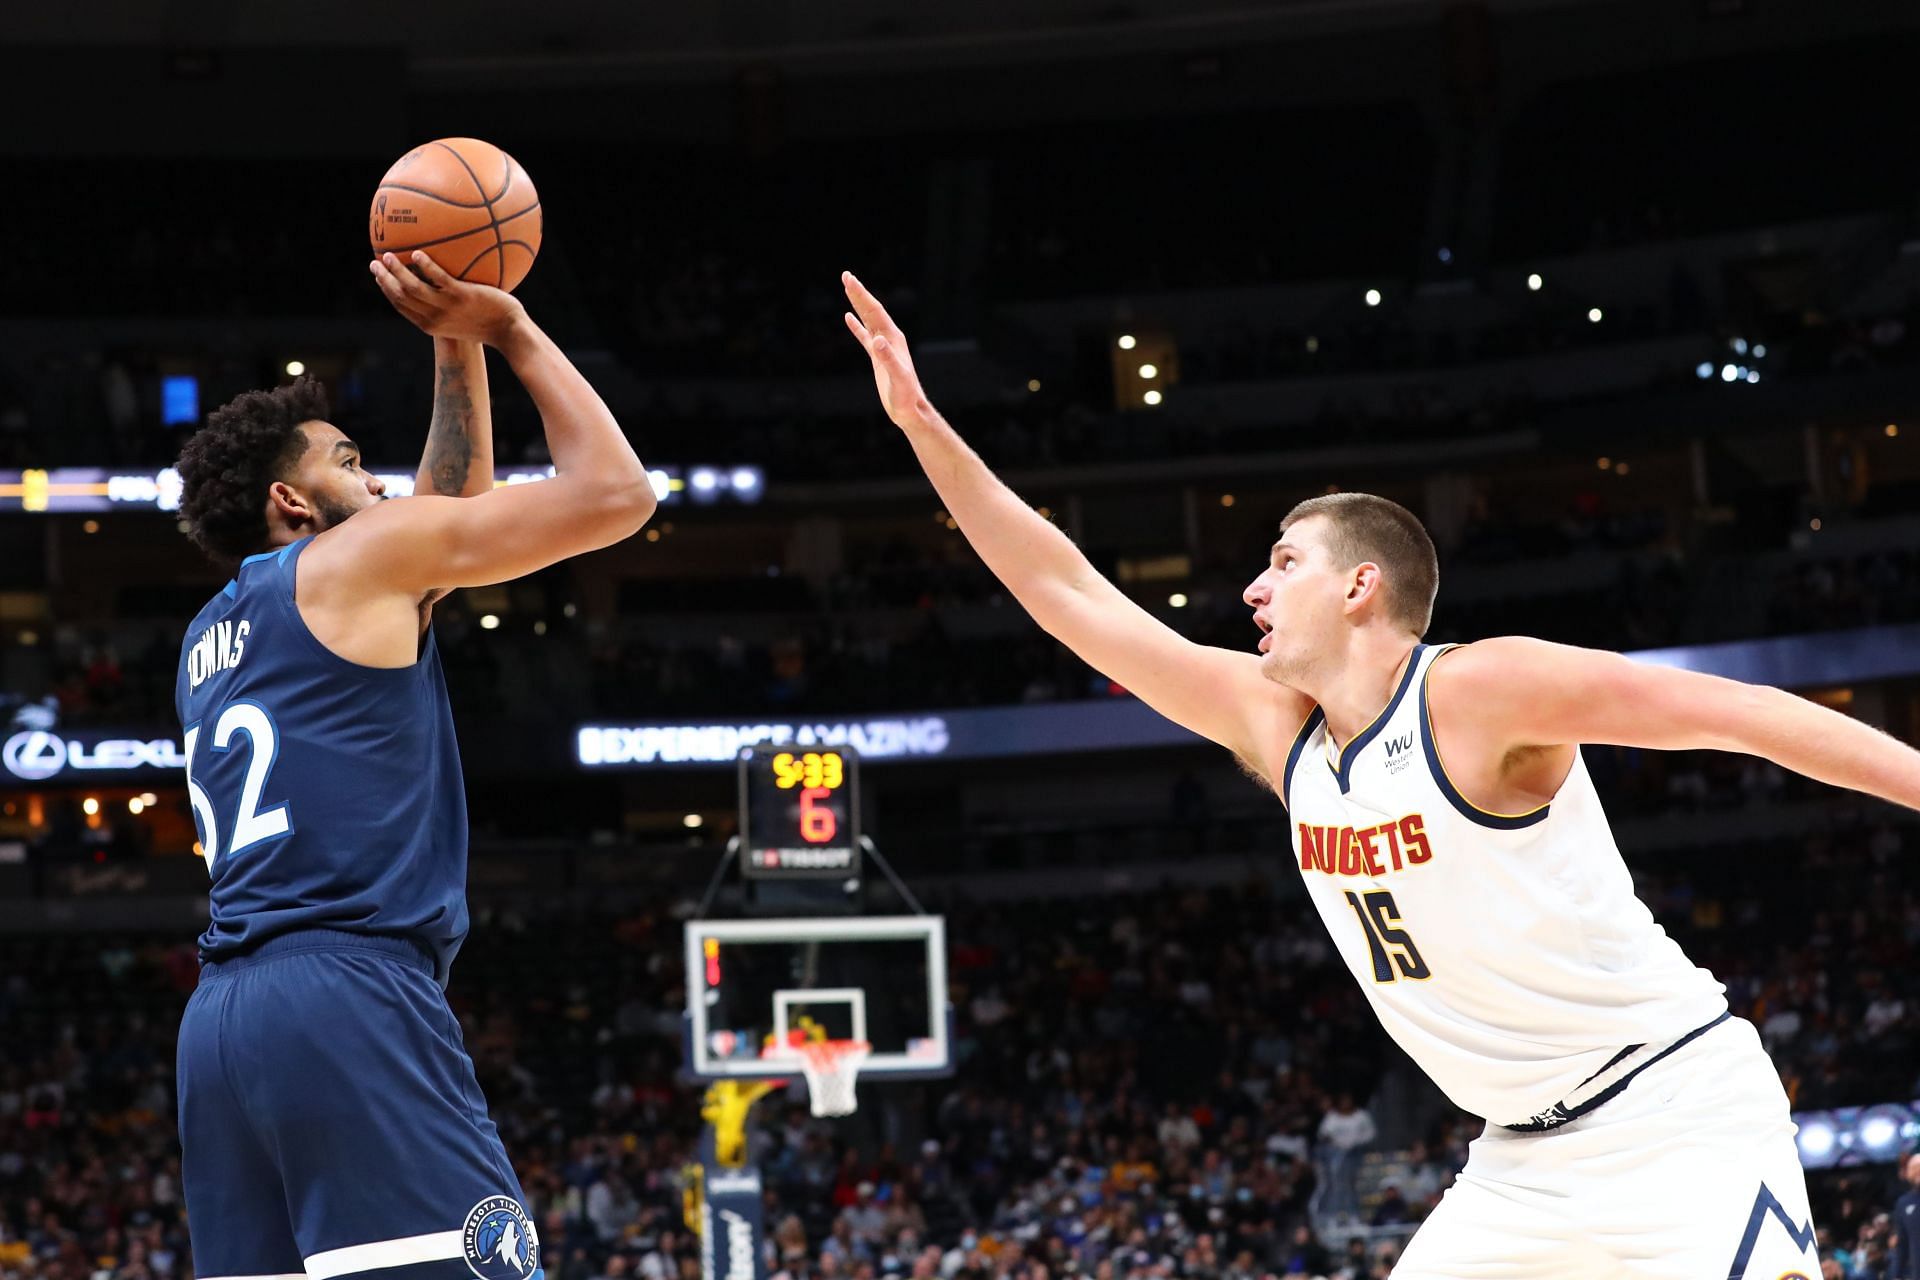 Karl-Anthony Towns #32 of the Minnesota Timberwolves shoots the ball over Nikola Jokic #15 of the Denver Nuggets during the second quarter at Ball Arena on October 8, 2021 in Denver, Colorado.